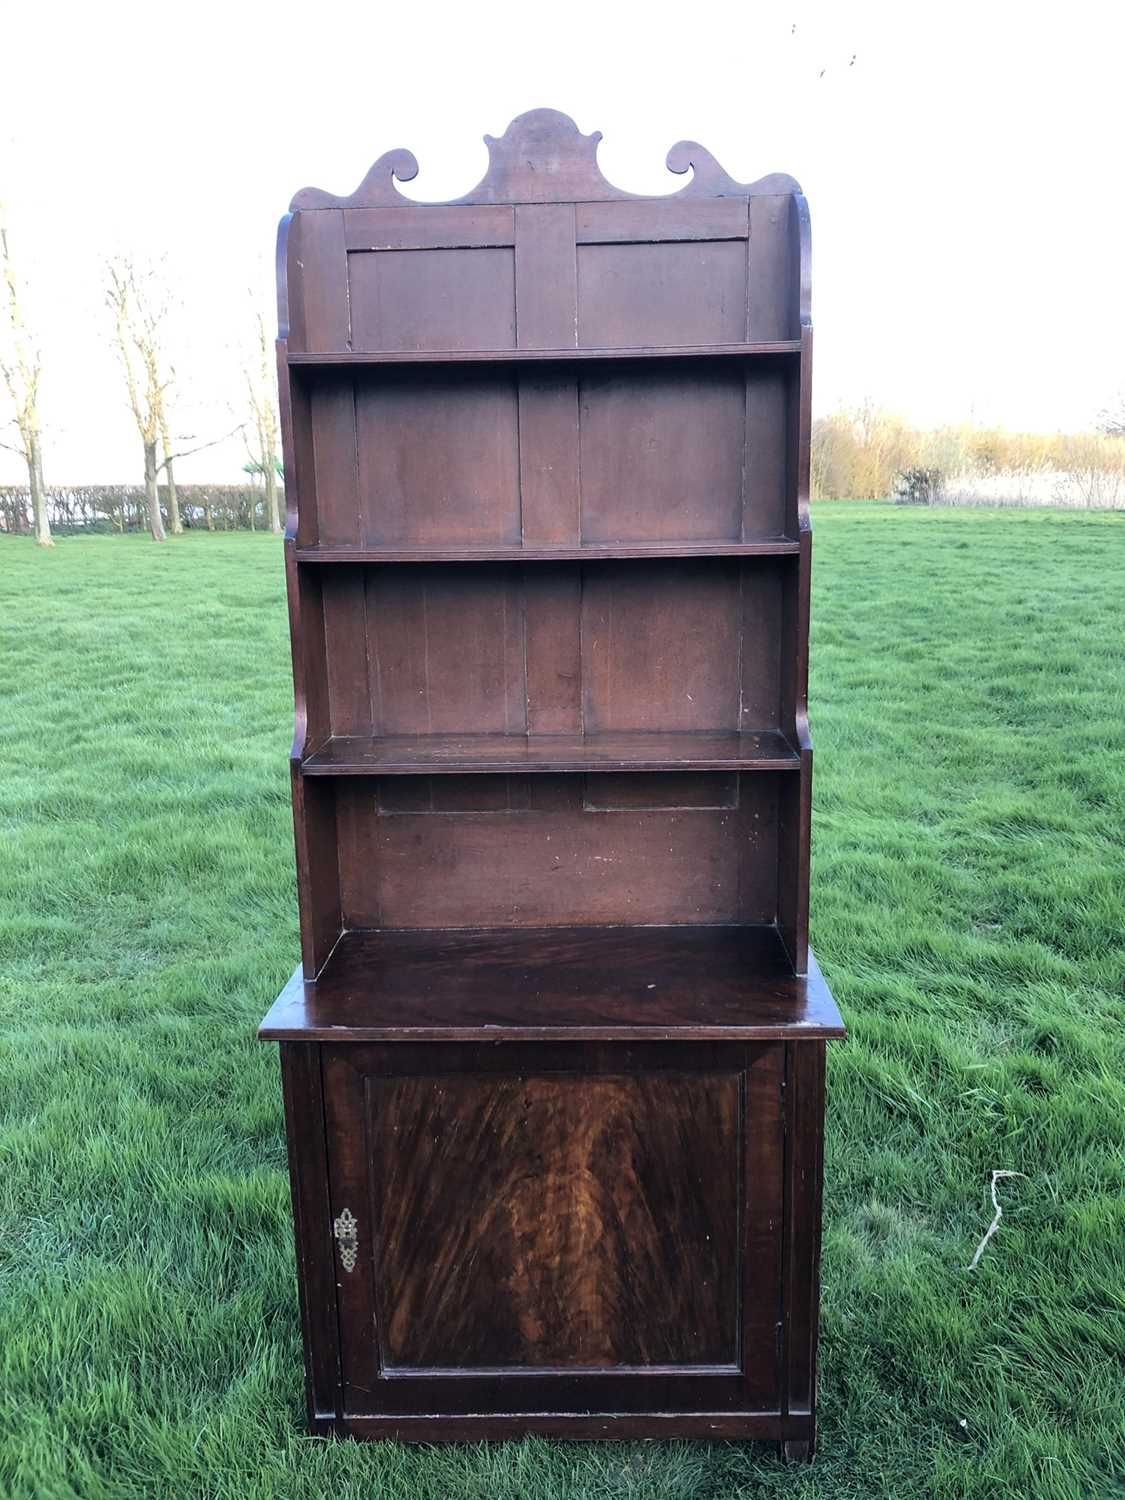 Lot 977 - 19th century mahogany and grained waterfall bookcase with scrolling top rail and graduated open shelves, enclosed panel cupboard below, on tapering legs, 78cm wide x 38cm deep x 190cm high